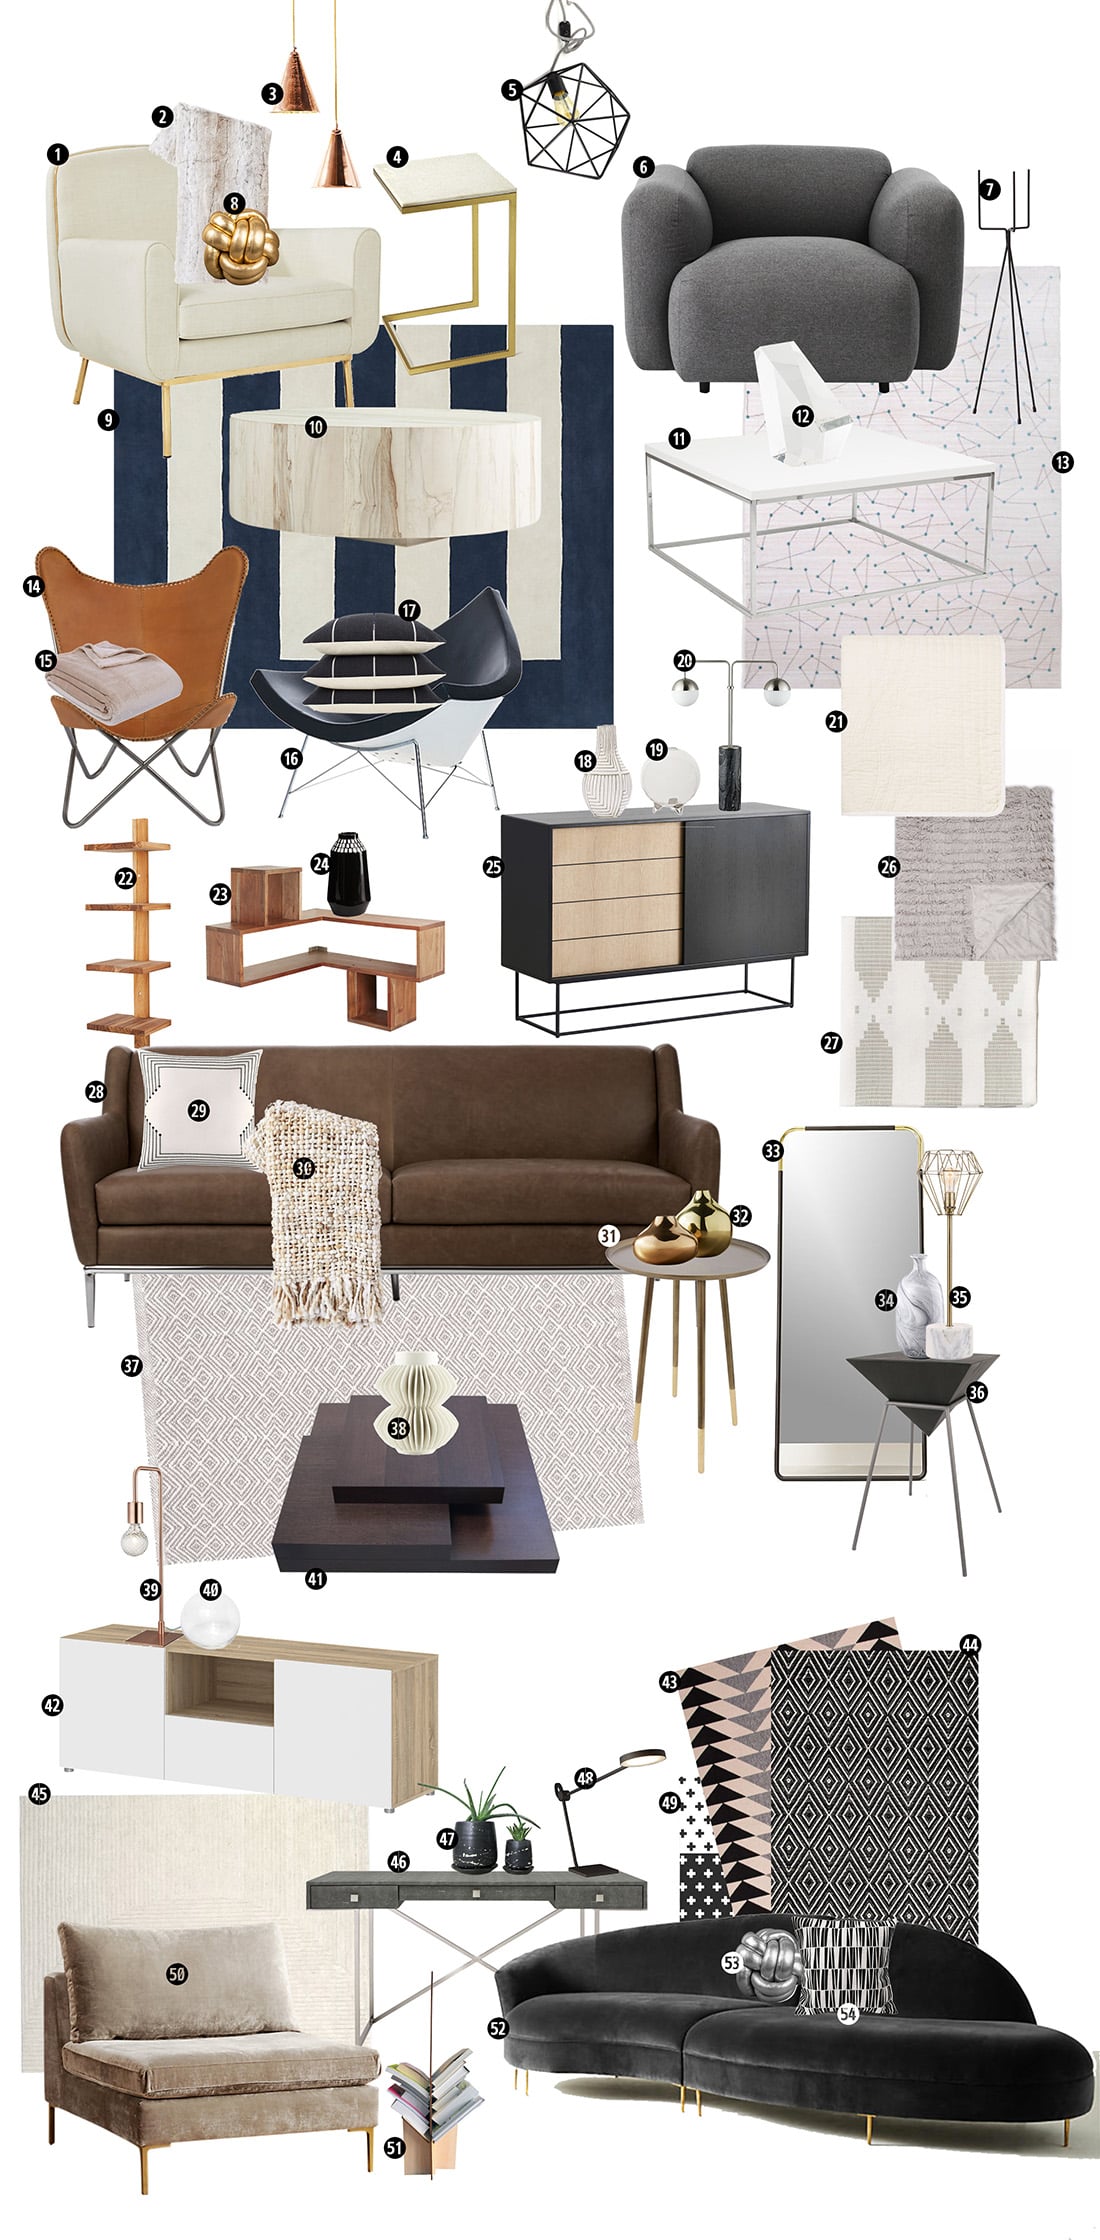 7 Signs Minimalist Decor is the Right Home Style for You • Little Gold Pixel • Click through to find out if you're compatible with minimalist decor!